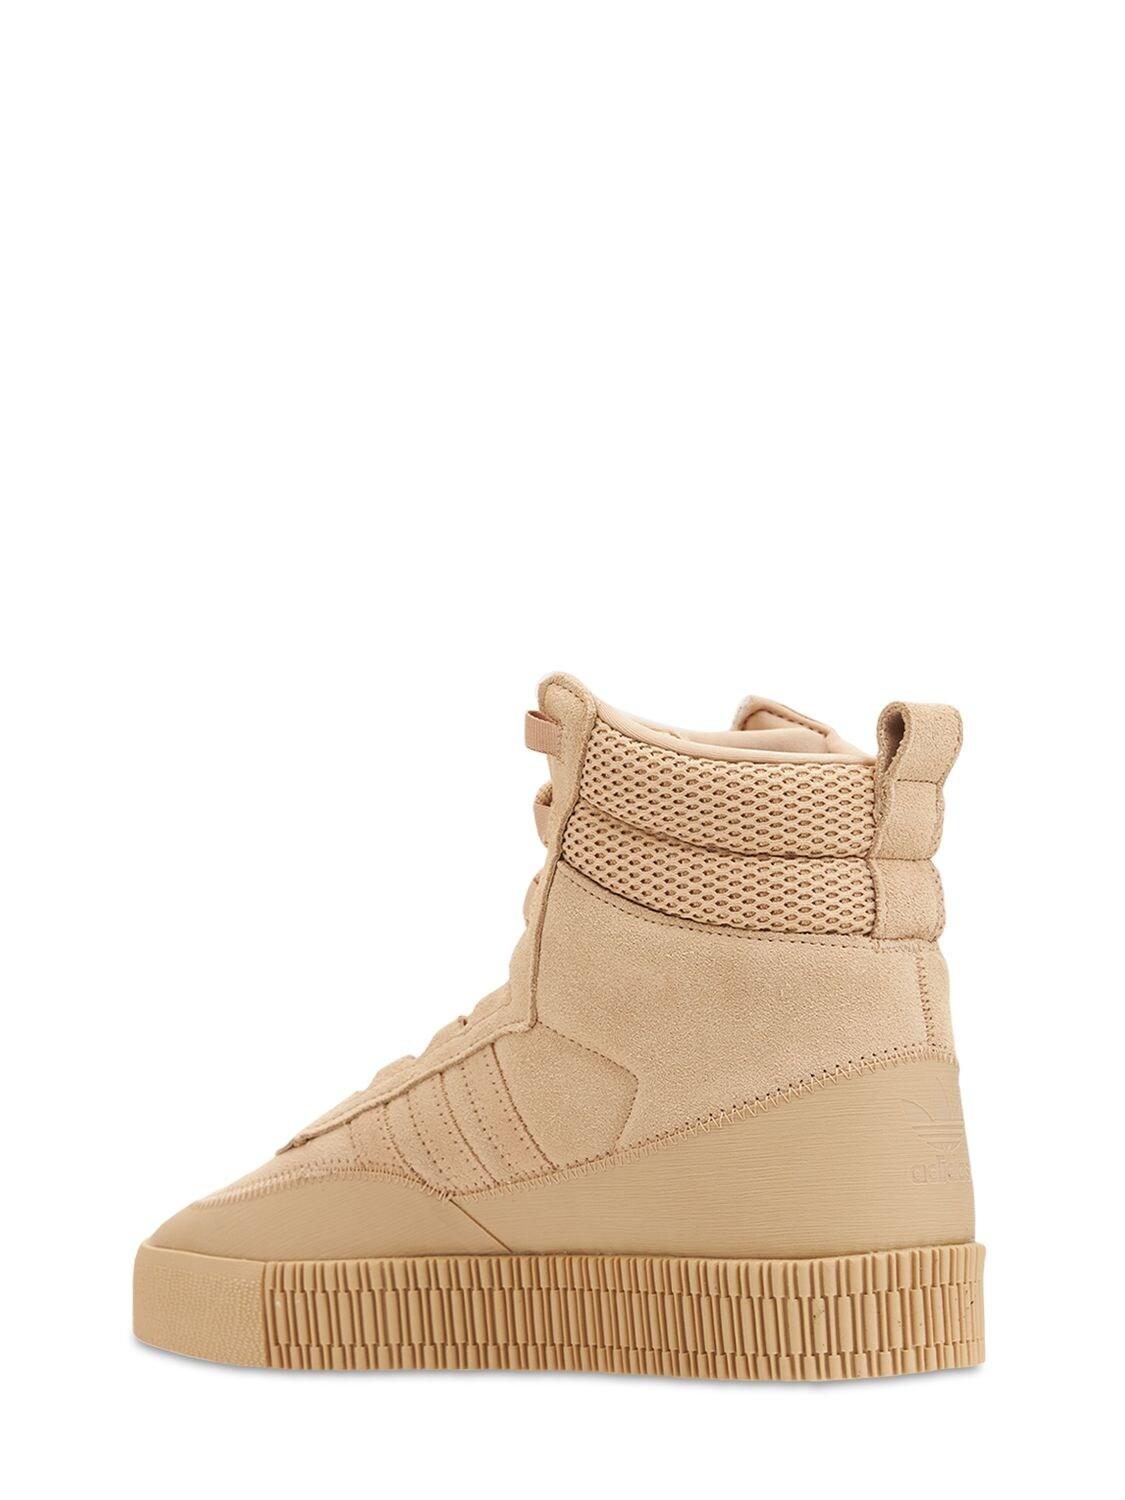 adidas Originals Samba Boots in Pale Nude (Natural) | Lyst